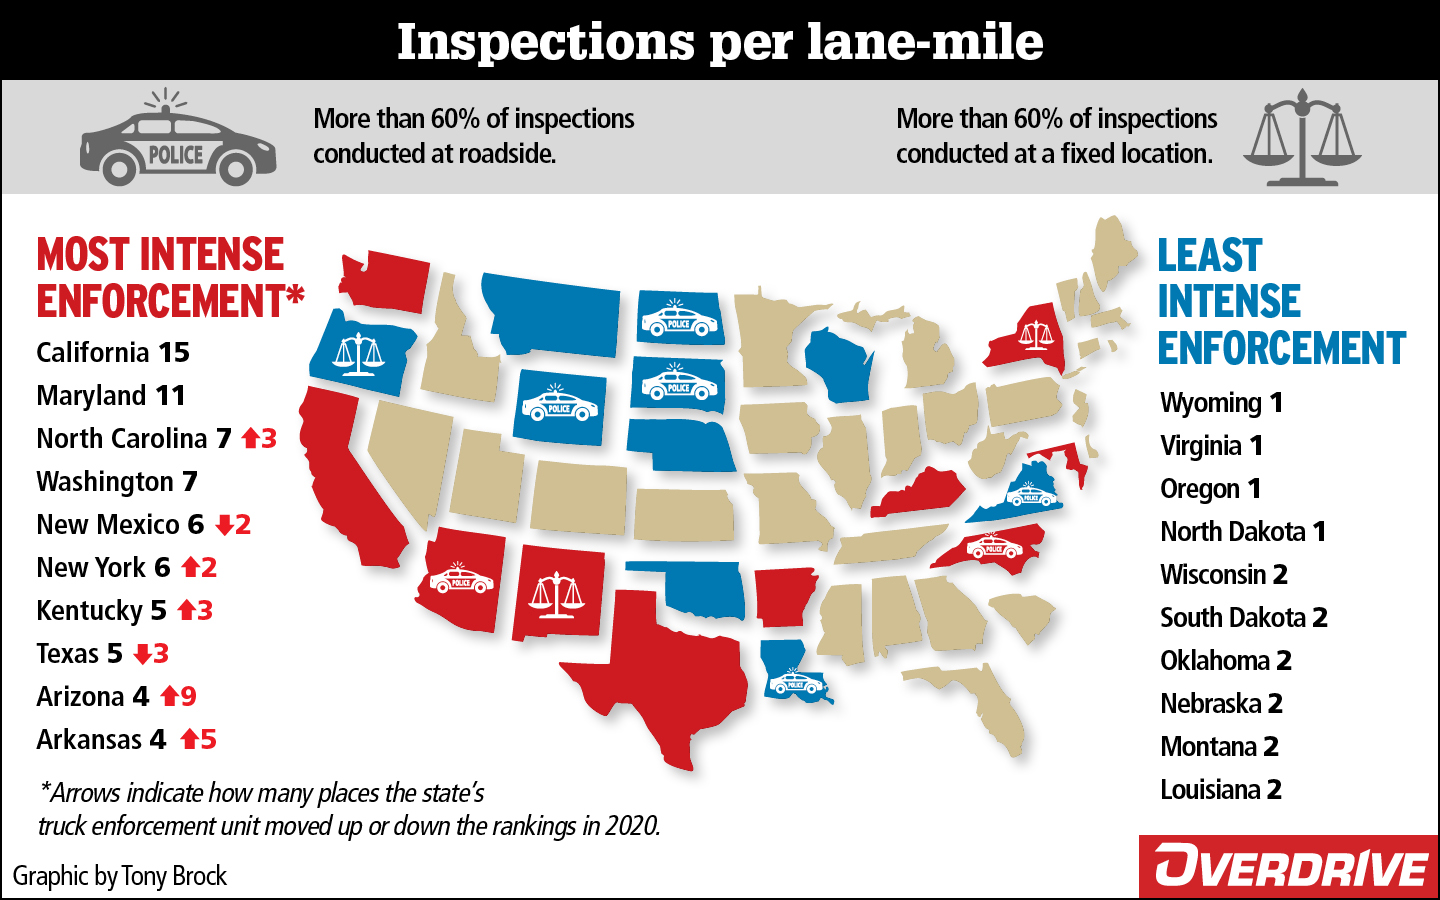 Inspections were down in 2020 compared to prior years on the order of 24%, given limitations on both trucking and enforcement operations that resulted with the COVID-19 pandemic, particularly in its early months.